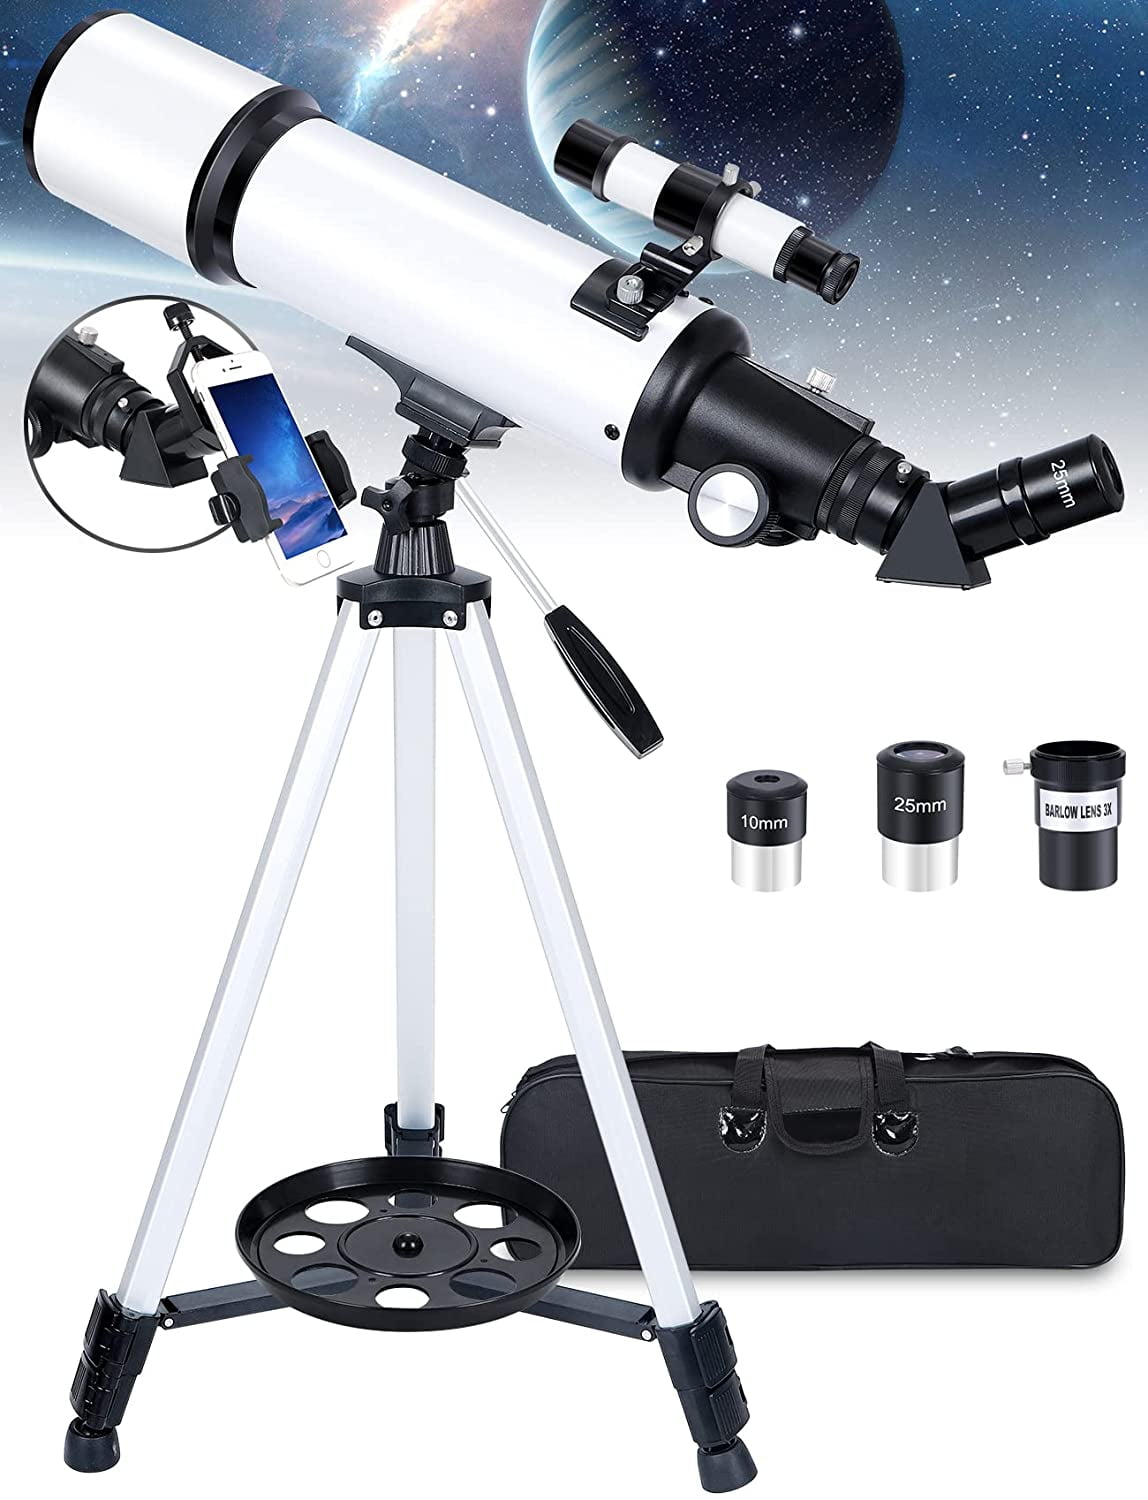 OPAITA Astronomy Telescope for Adults Beginners - 70mm Aperture 500mm Focal Length Eclipse Telescope - Professional 150X Magnification Portable Telescope for Kids with Adjustable Tripod Phone Adapter